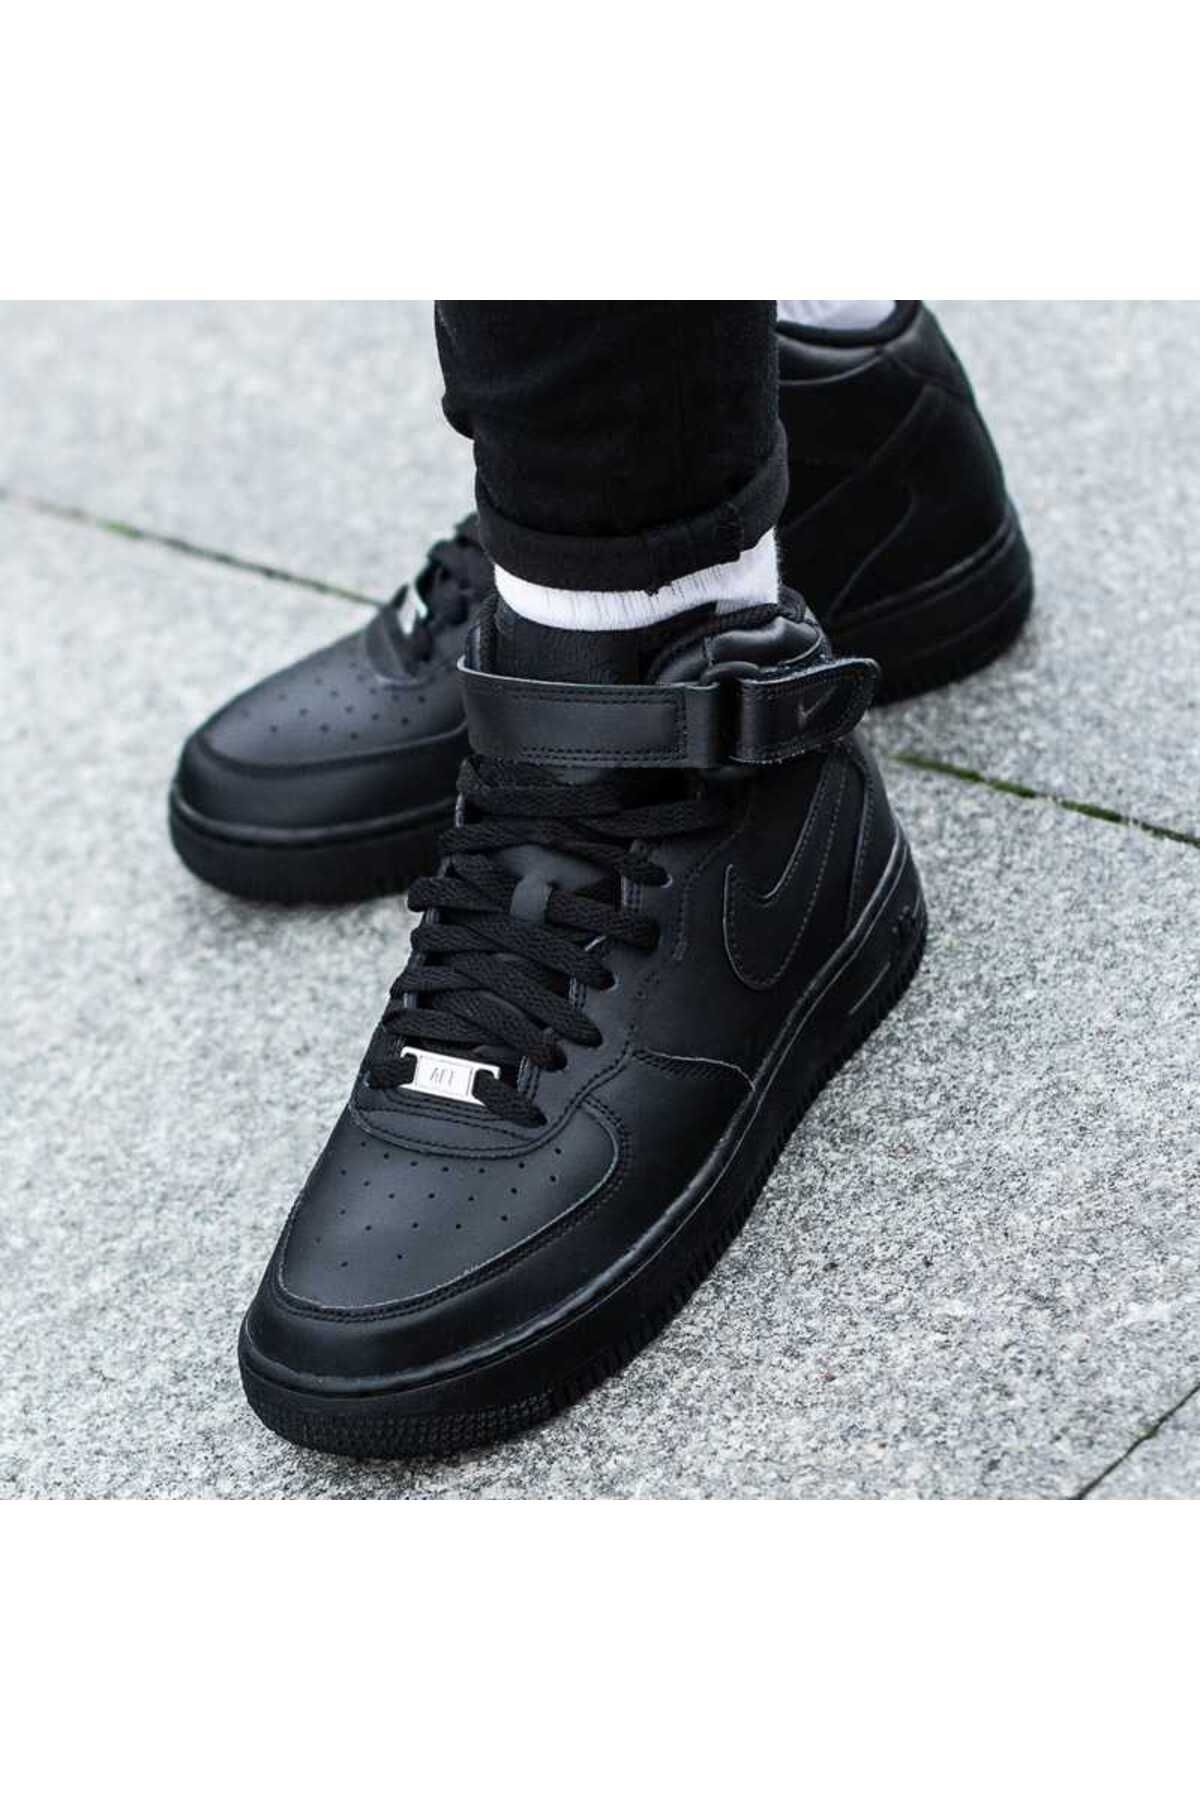 Nike AIR FORCE 1 MID (GS) 314195-004 Bot